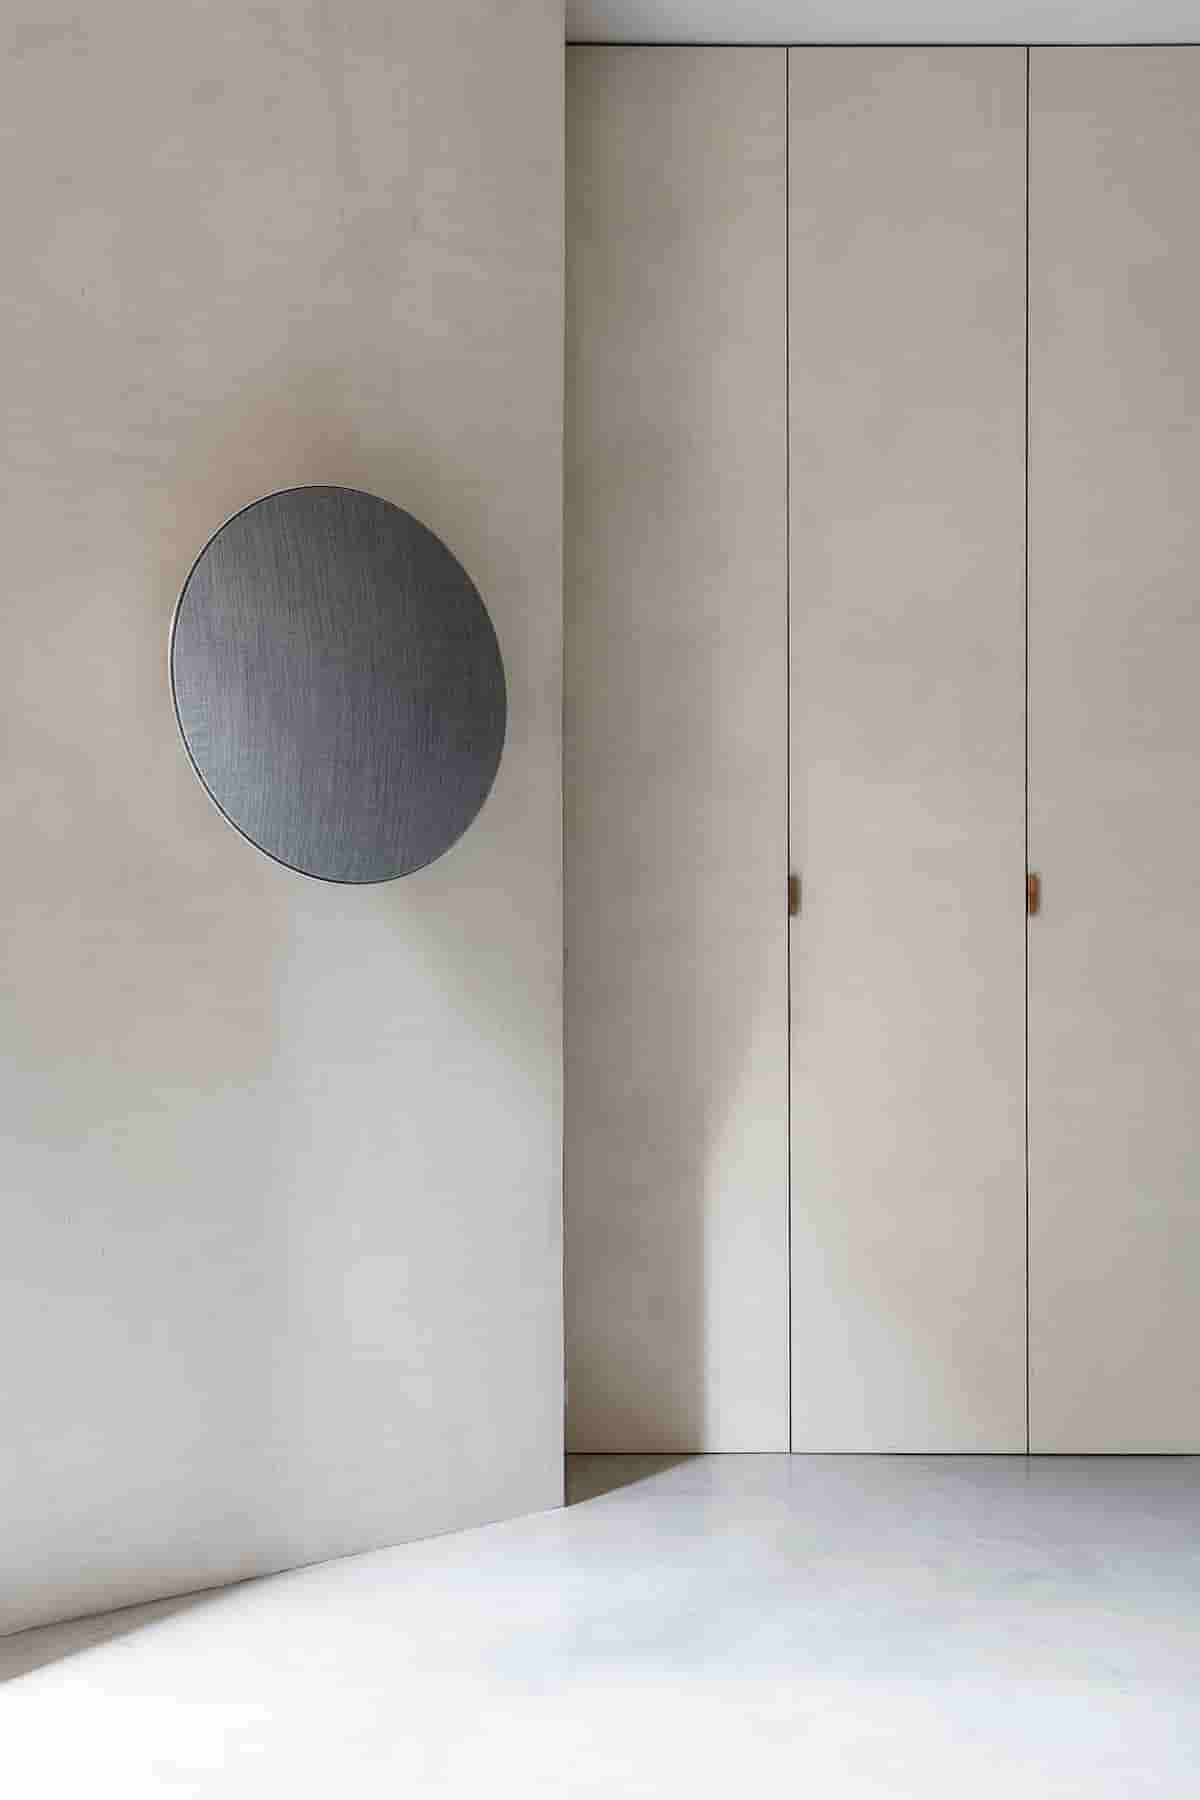 Mar Vicens & Ask Anker Aistrup's Berlin Home is a Contemplative Haven of Soulful Minimalism